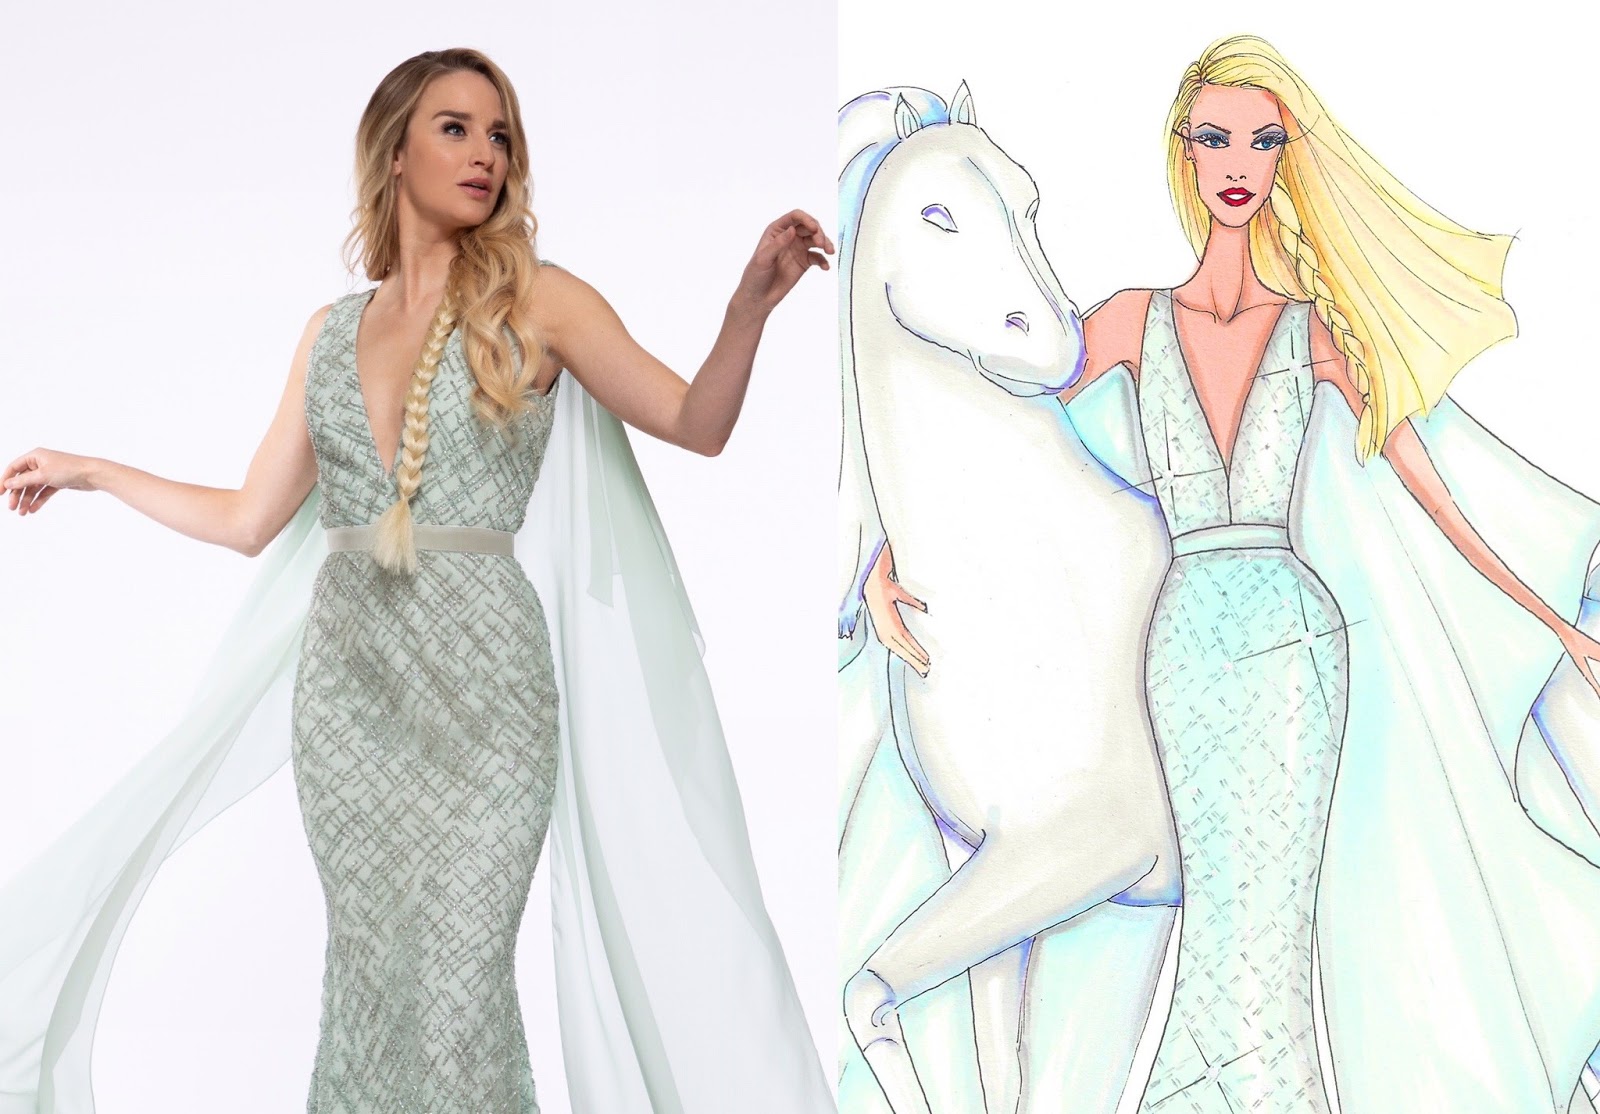 Video First Look at the Elsa-Inspired 'Frozen' Wedding Gown - ABC News